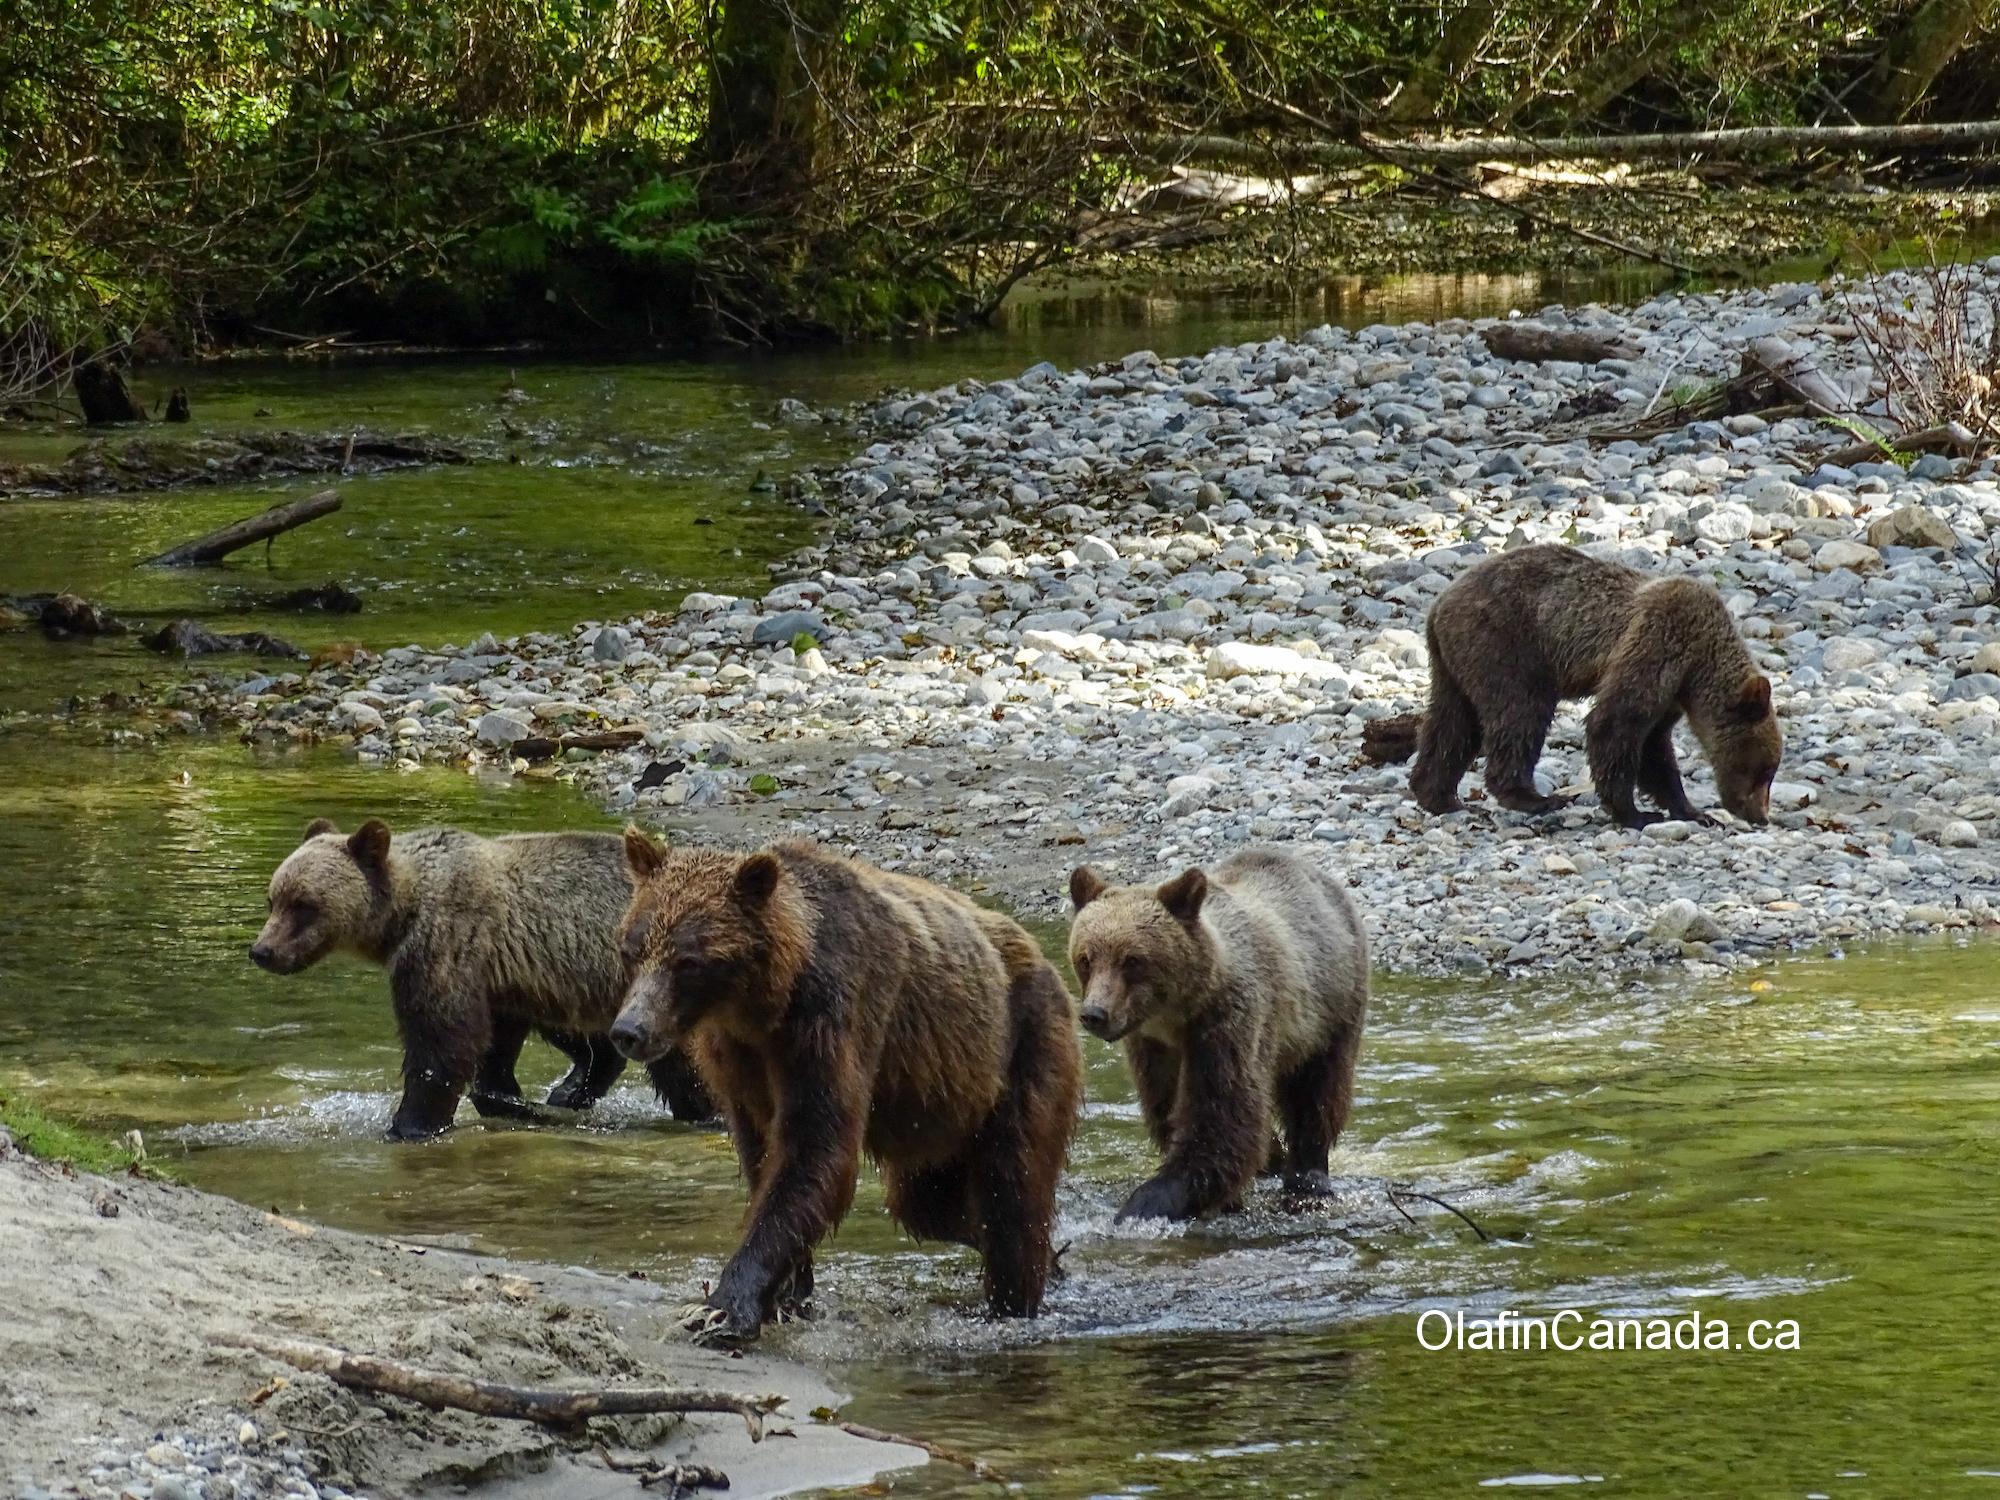 Grizzly family in Bute Inlet, BC #olafincanada #britishcolumbia #discoverbc #buteinlet #wildlife #grizzlybear